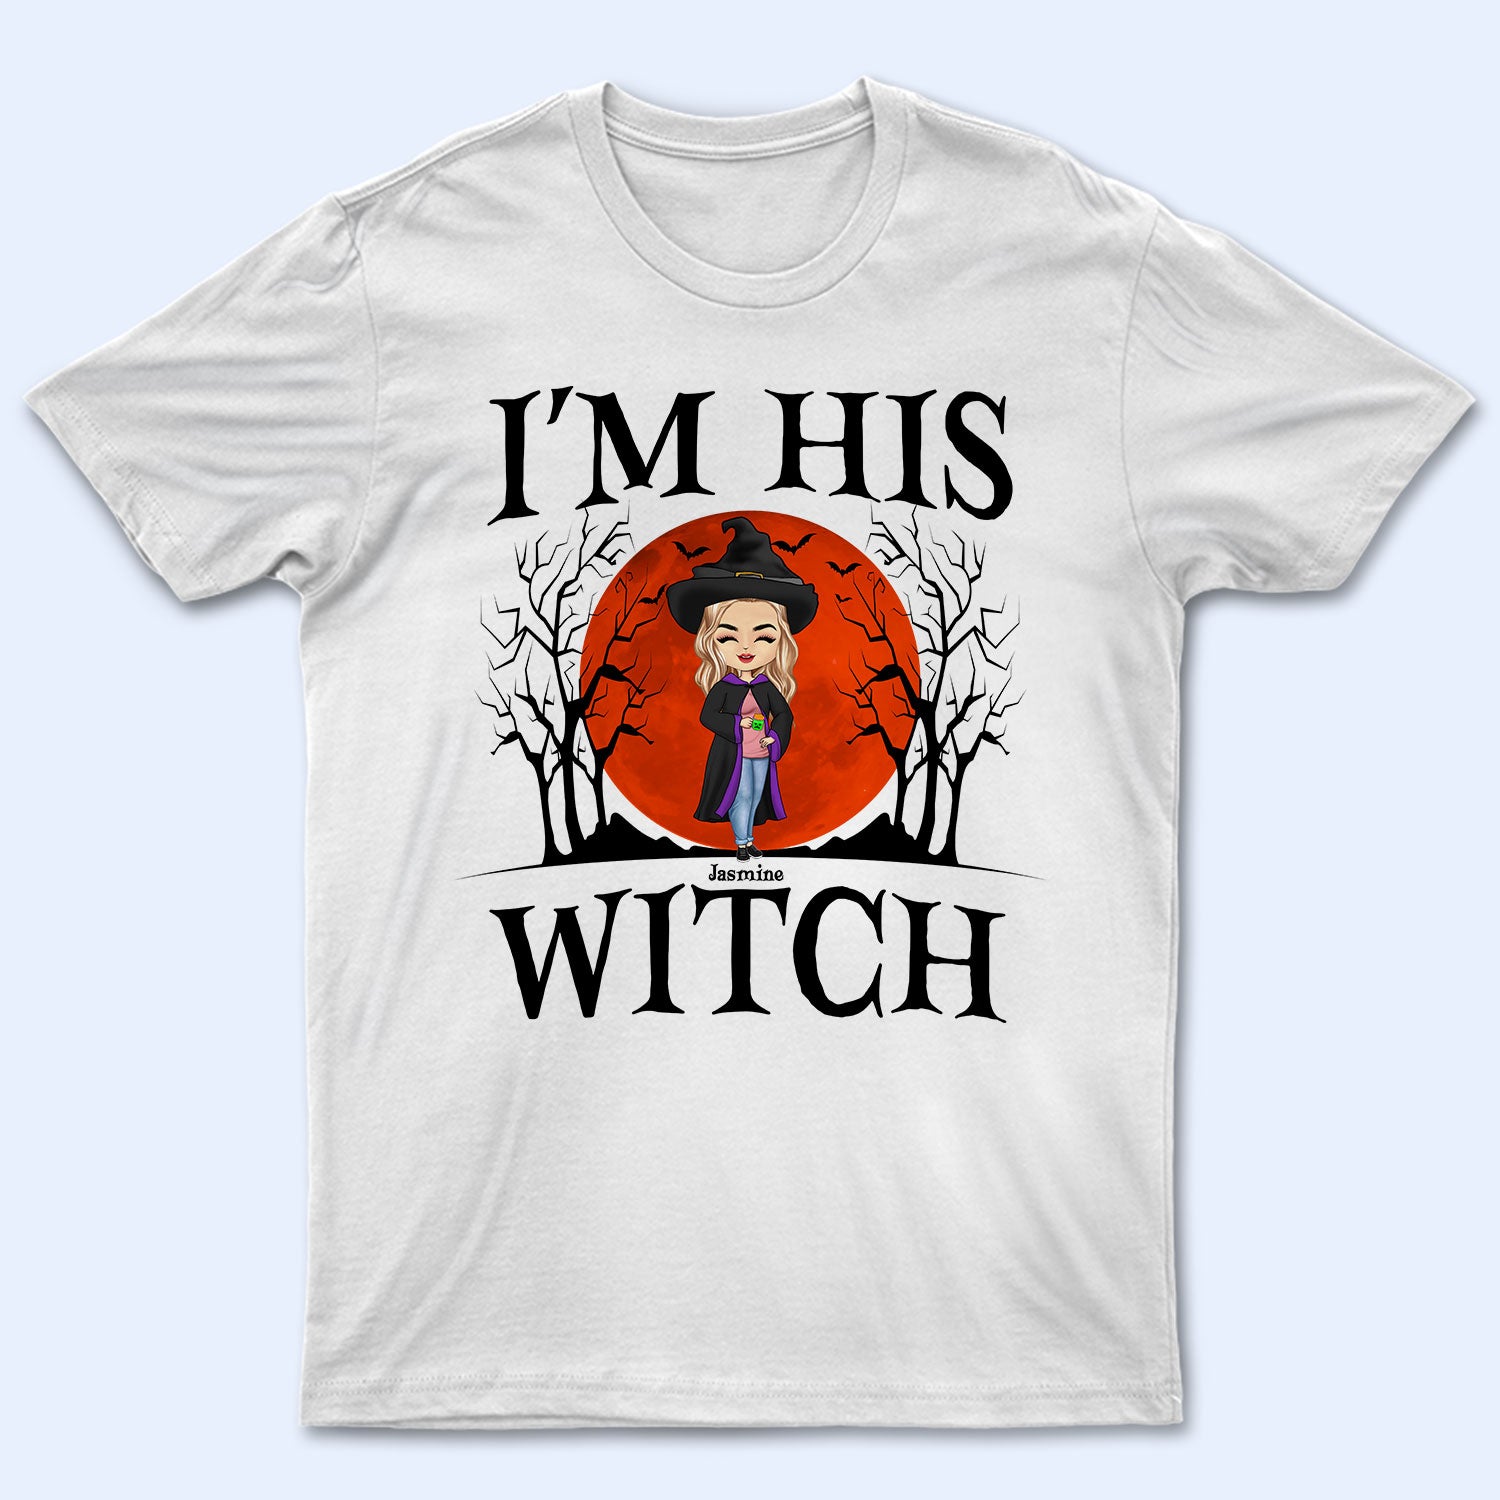 Her Boo His Witch - Gift For Couples - Personalized T Shirt